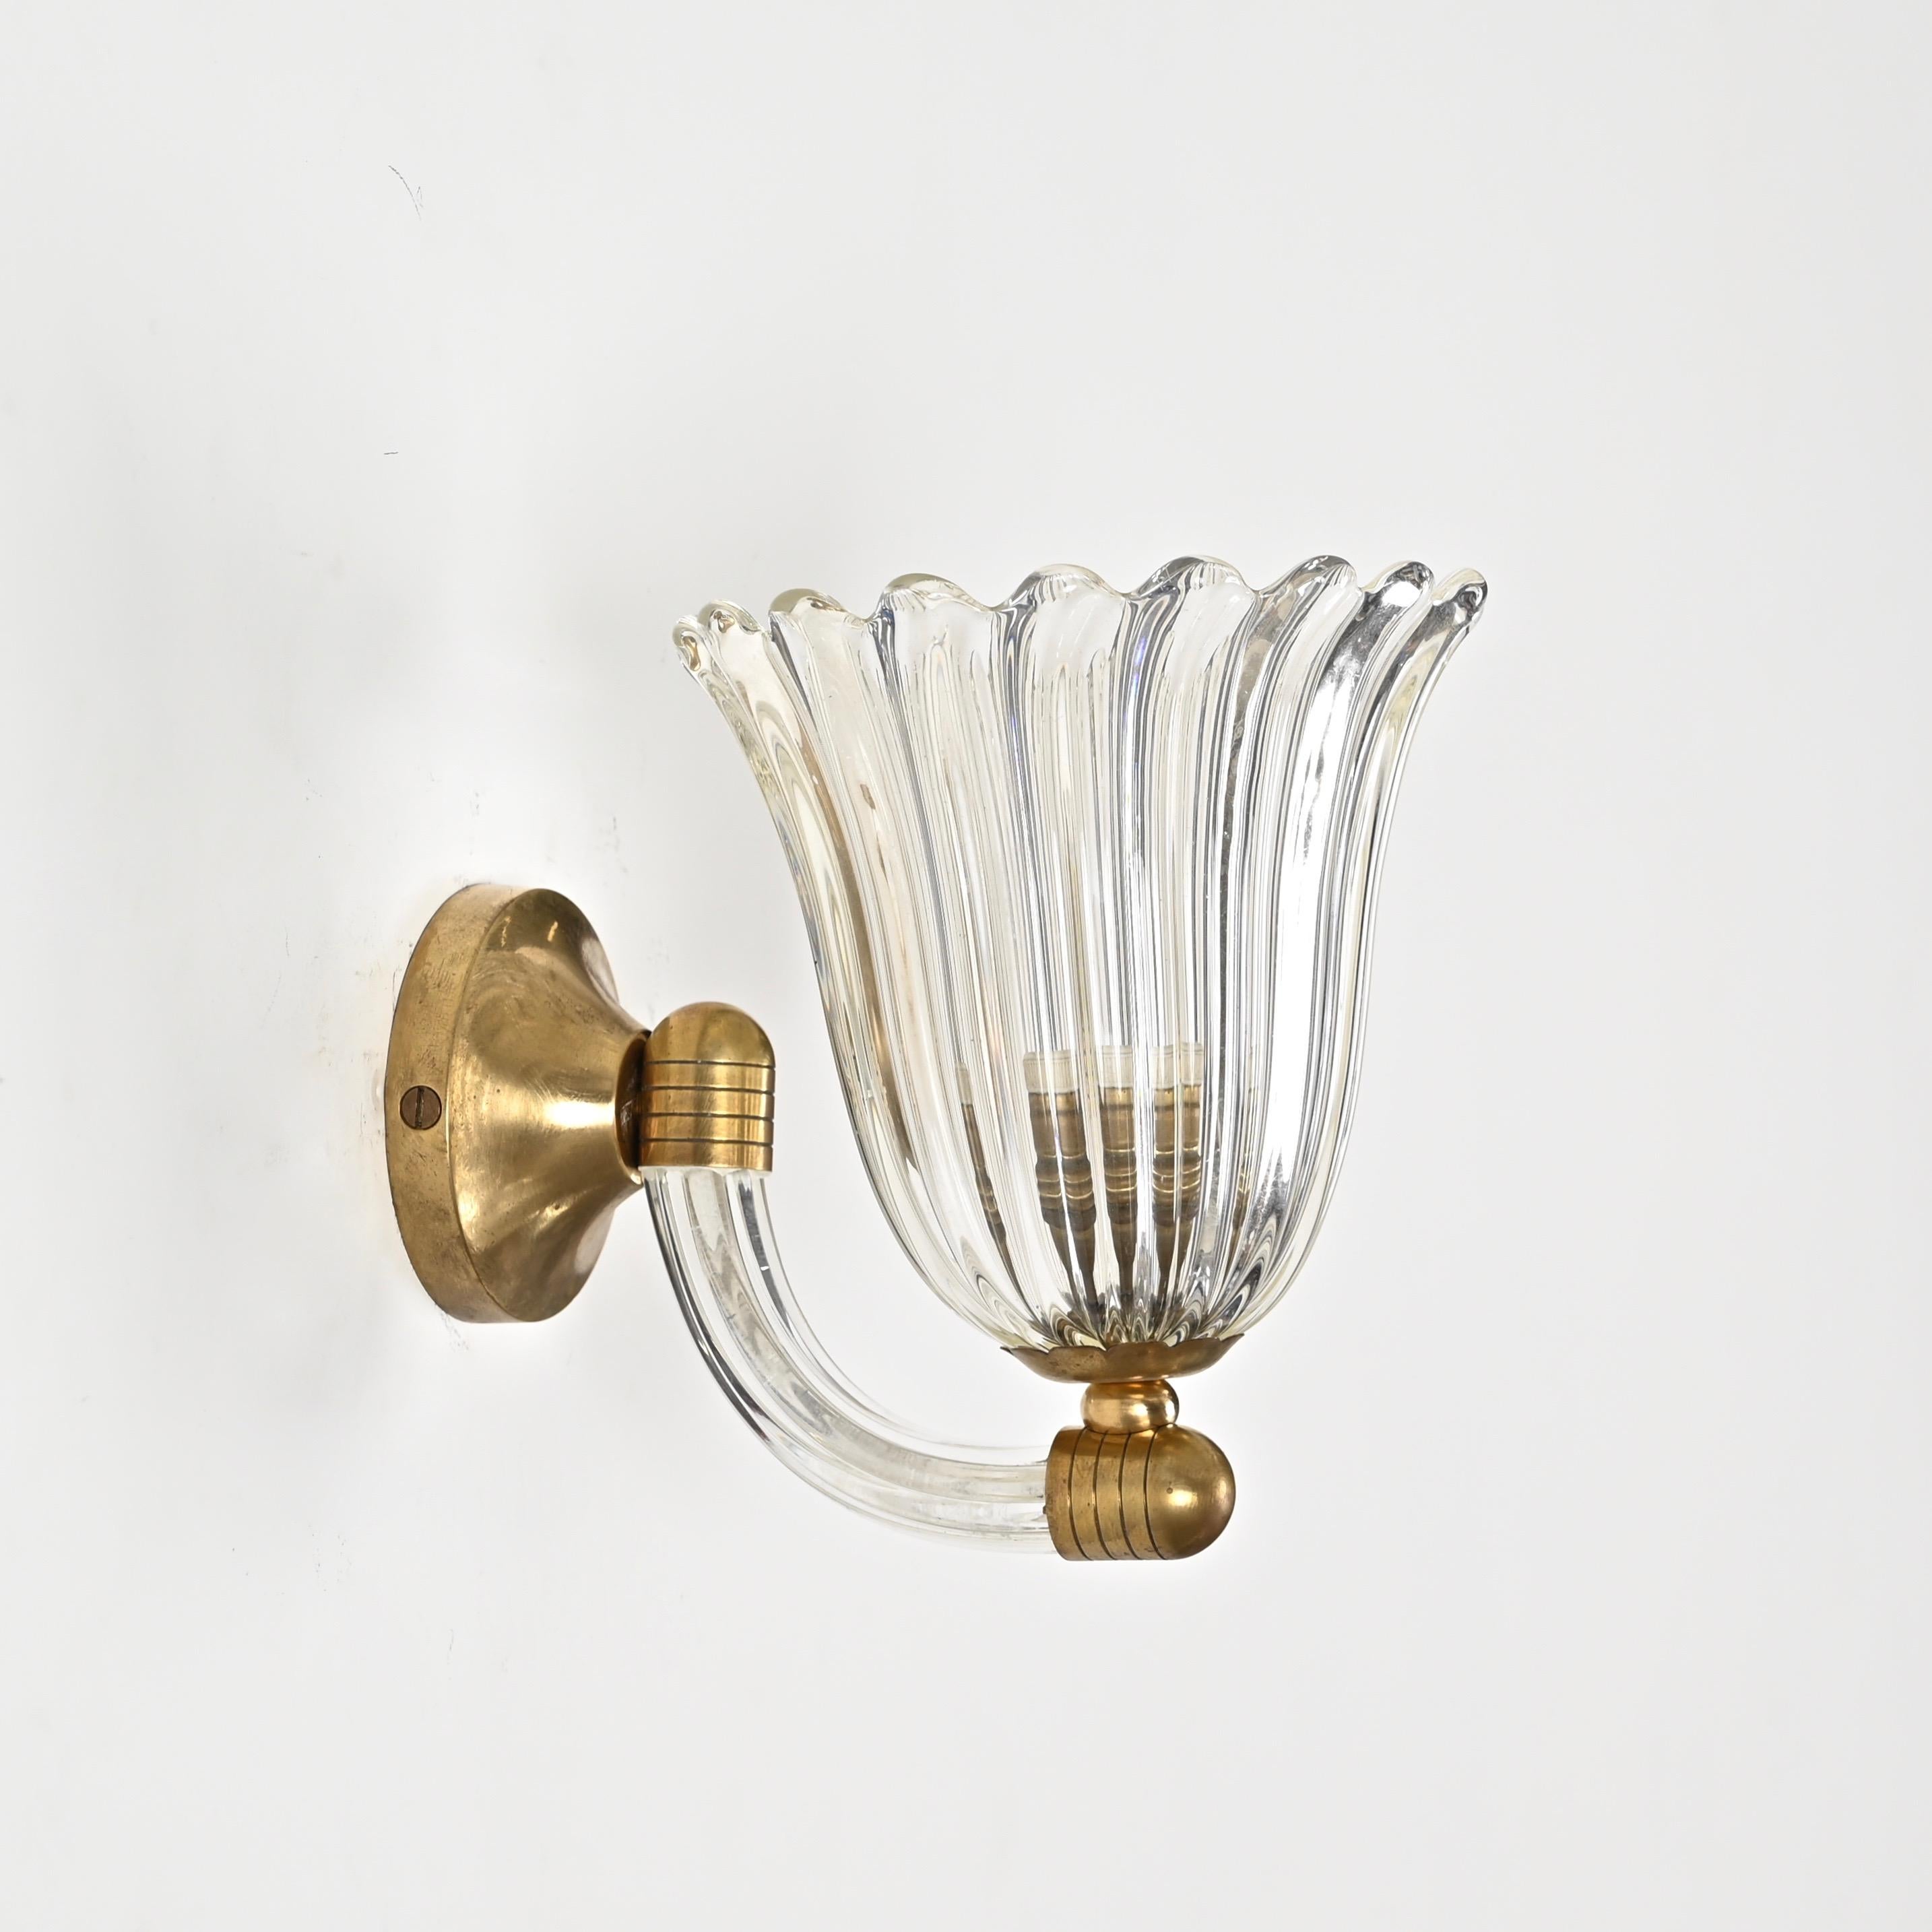 Mid-20th Century Pair of Murano Glass and Brass Flower Sconces, by Barovier, Italy 1950s